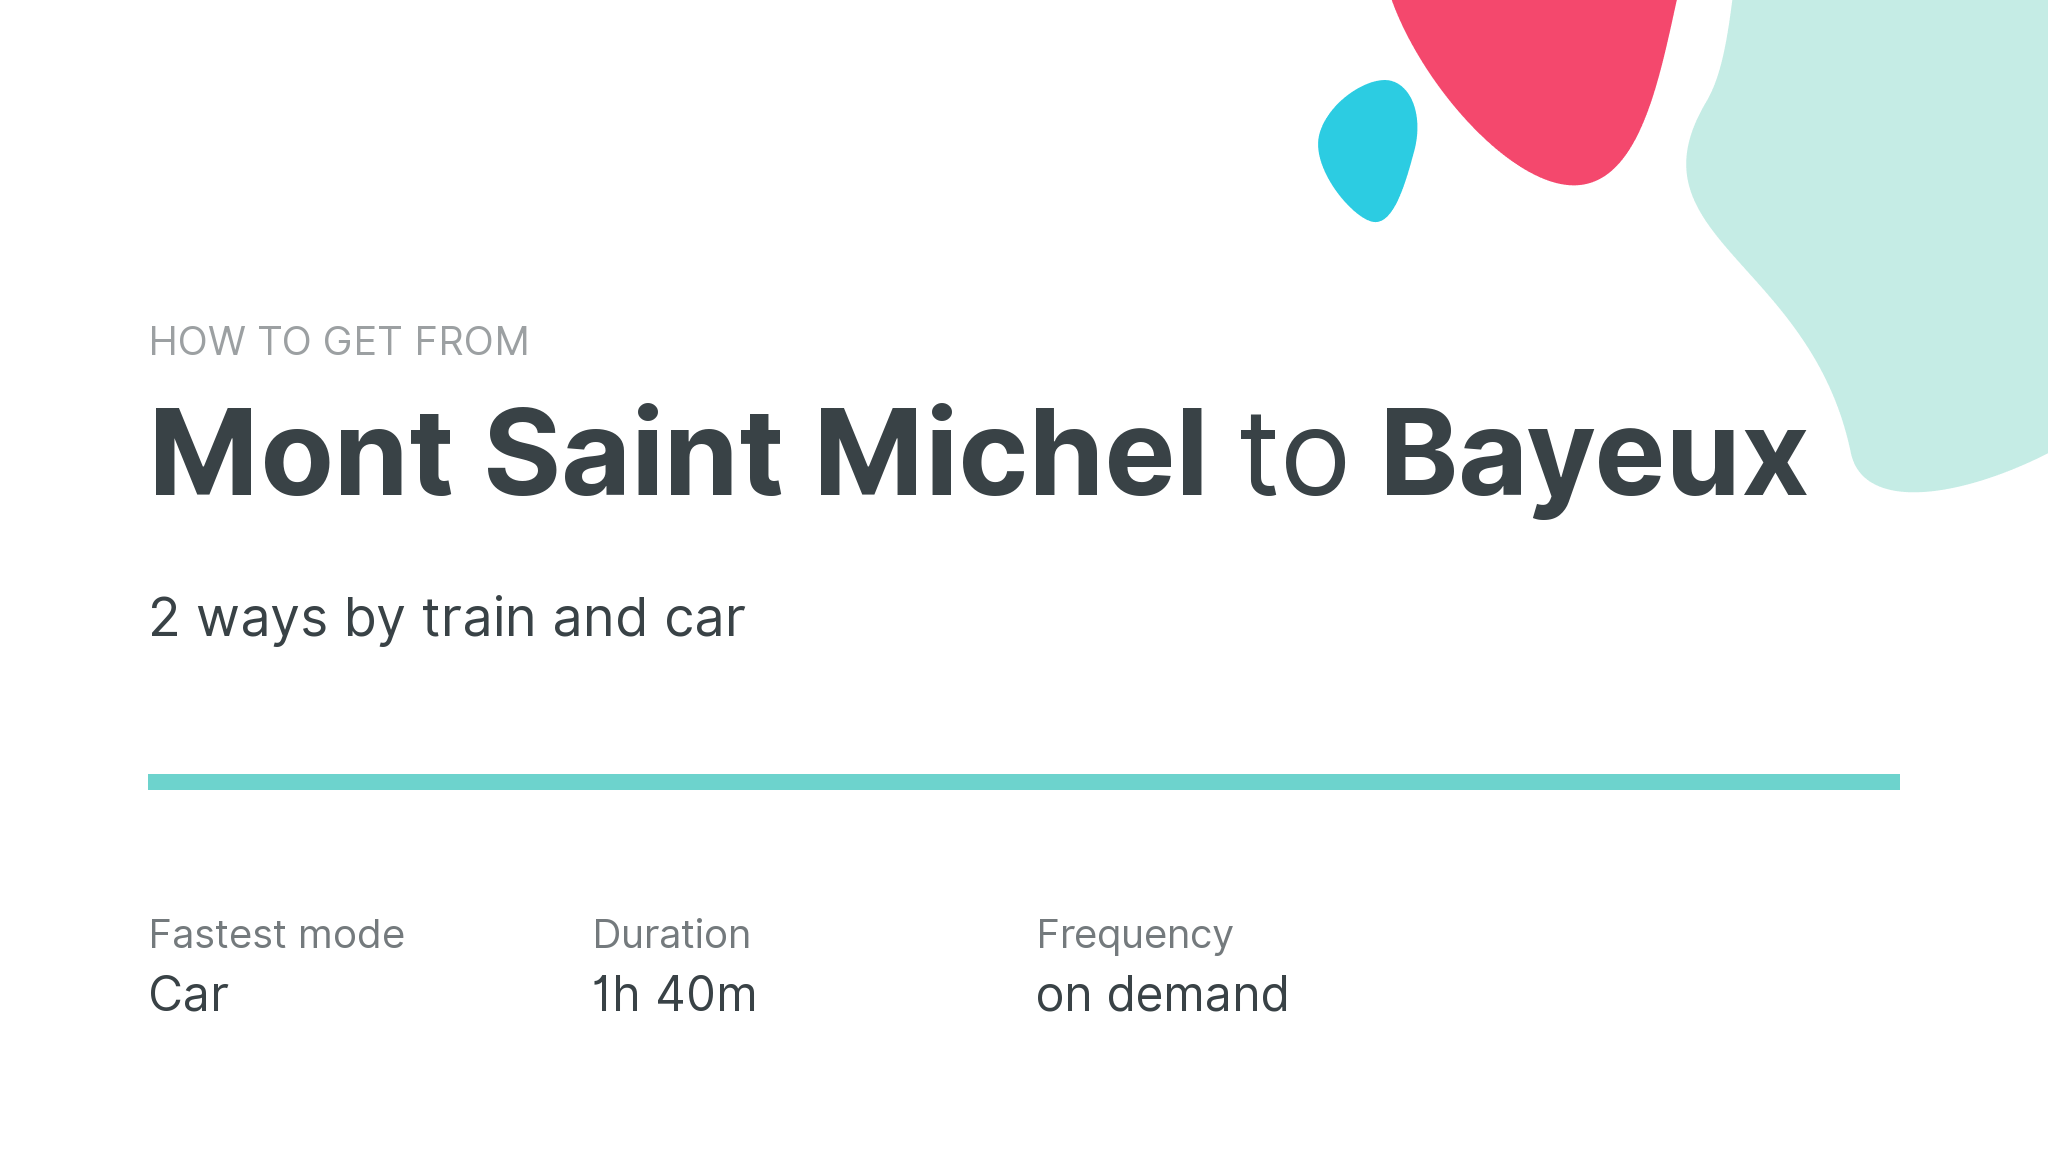 How do I get from Mont Saint Michel to Bayeux